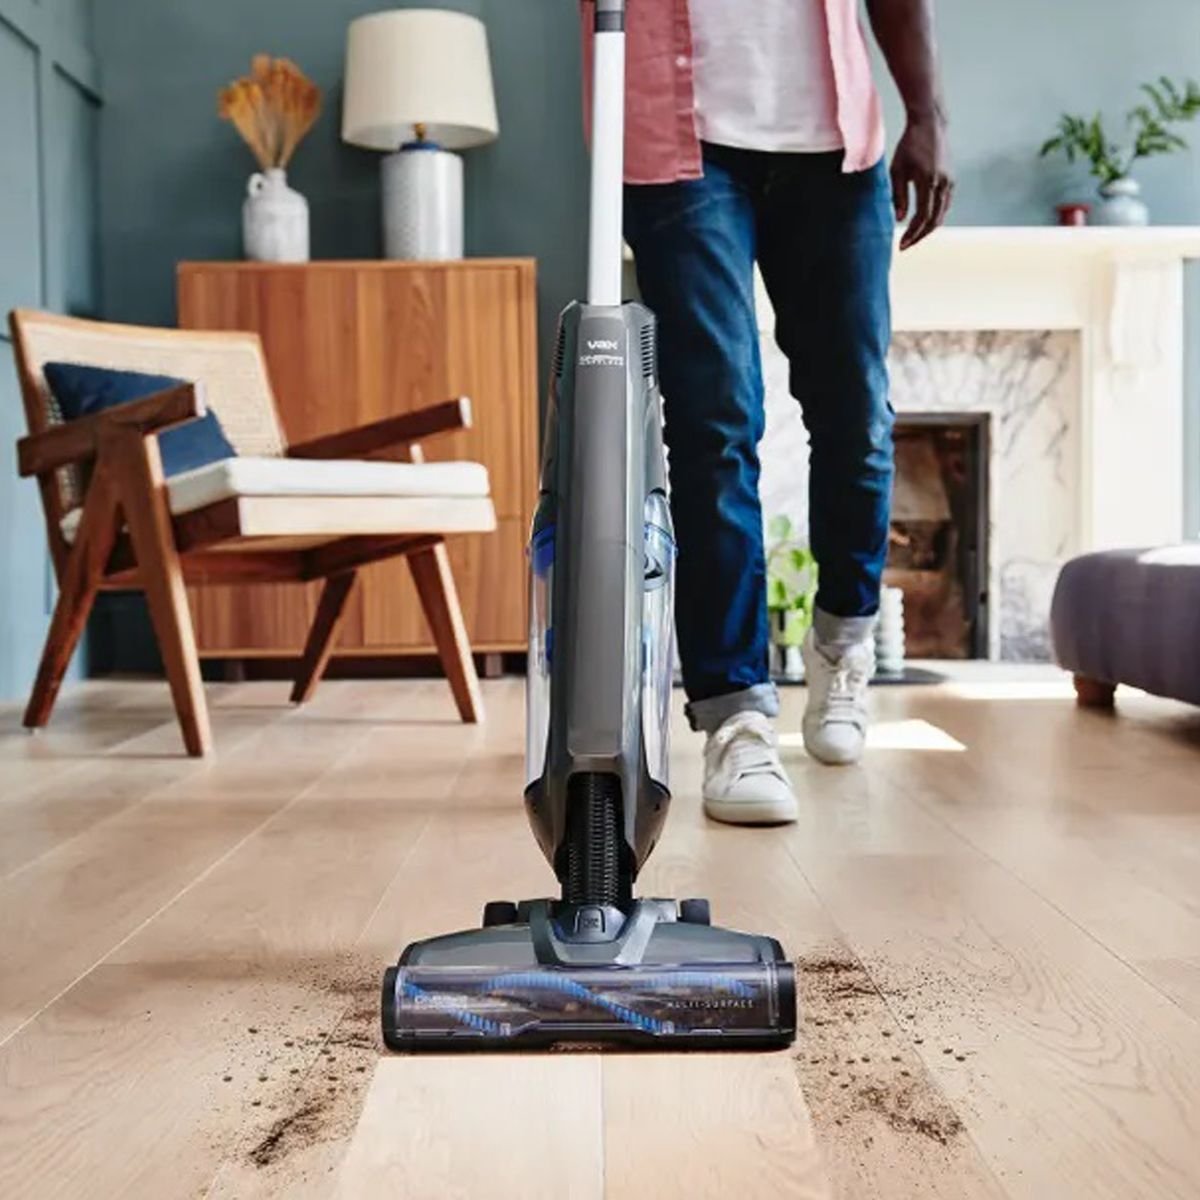 Vax ONEPWR Evolve cordless vacuum review